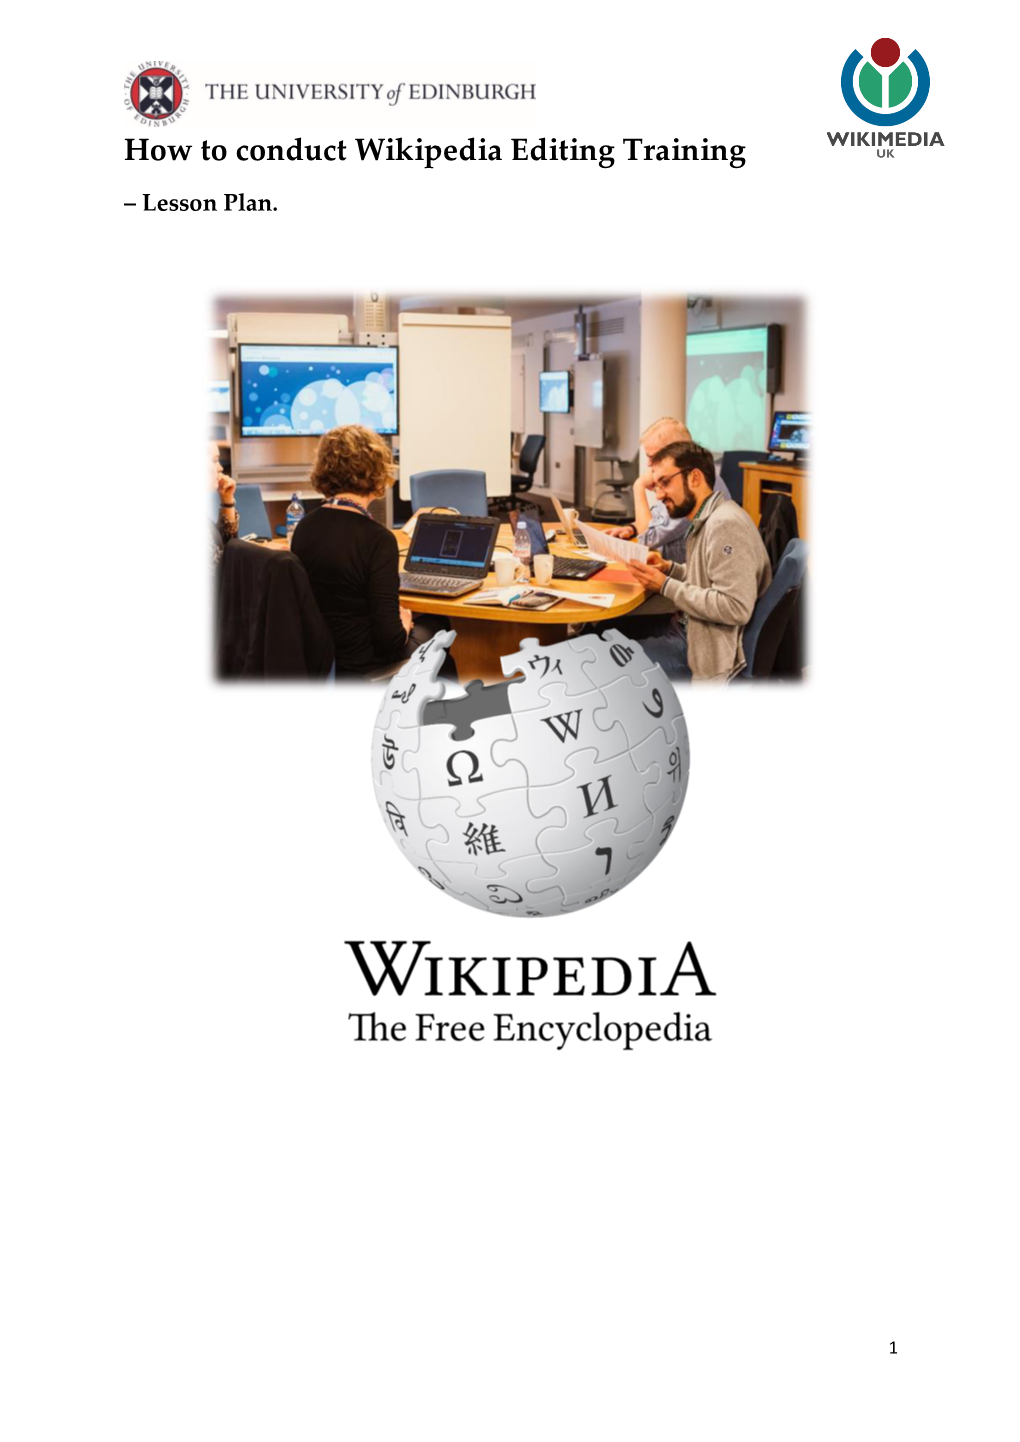 How to Conduct Wikipedia Editing Training